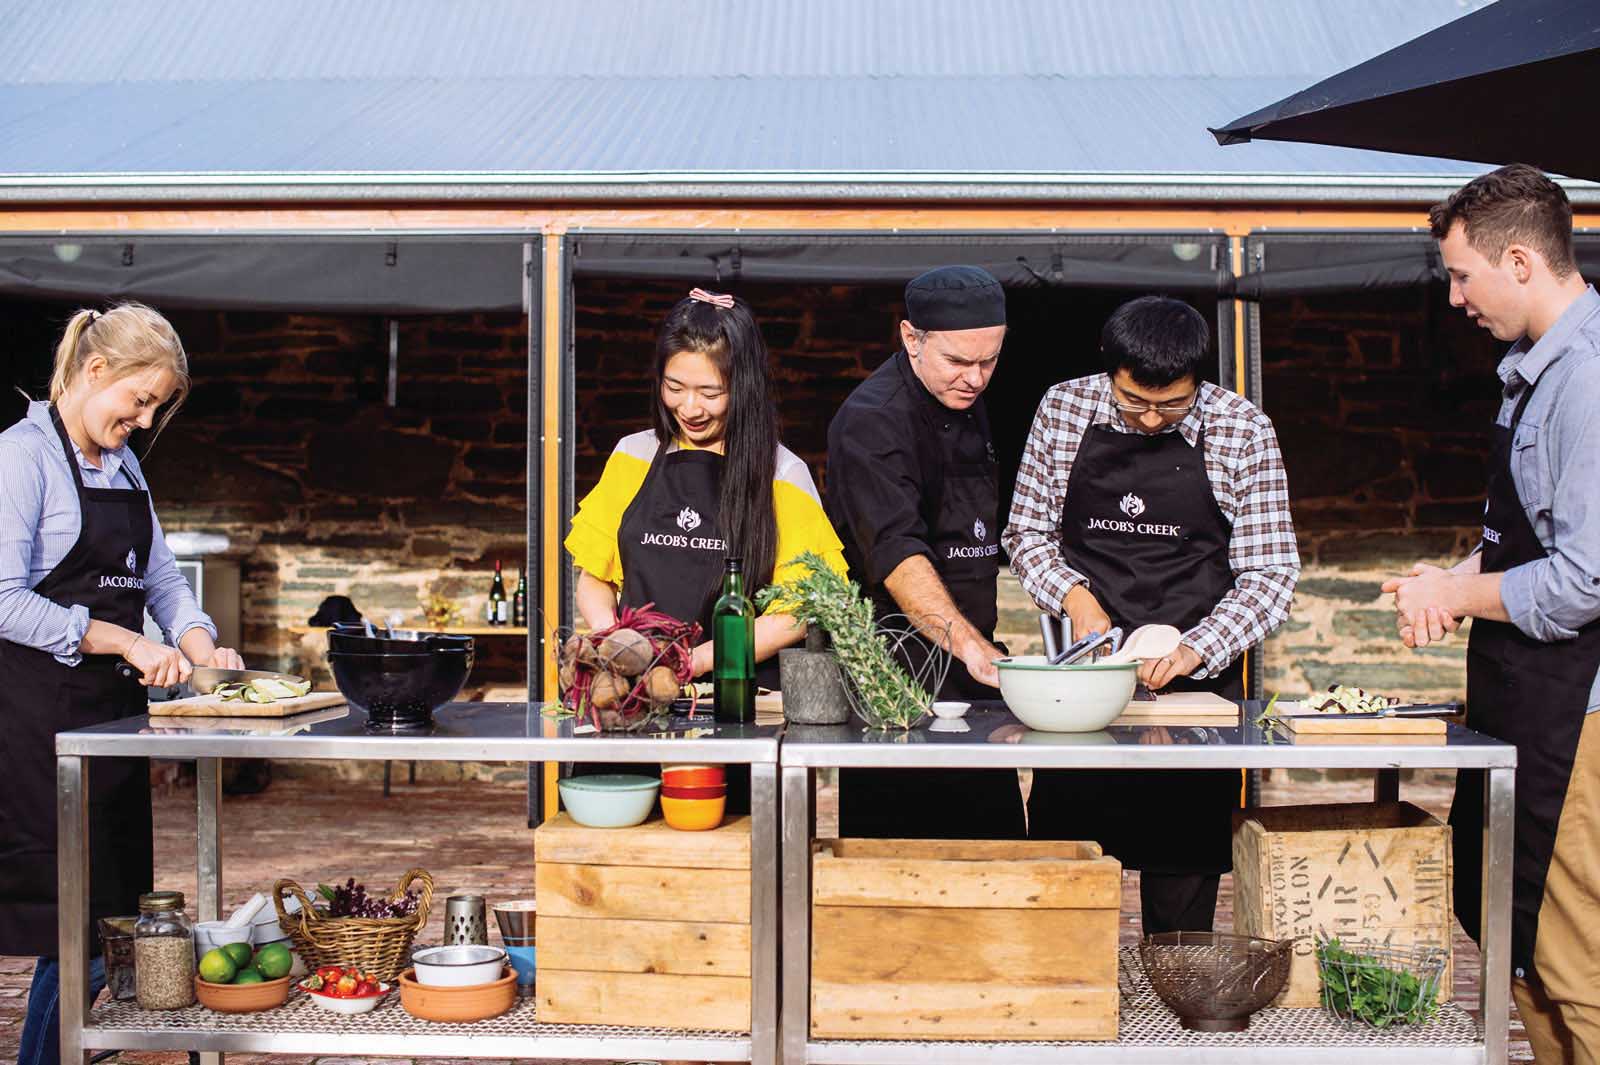 Jacob's Creek Winery cooking class | 10 of the best wineries to visit in South Australia